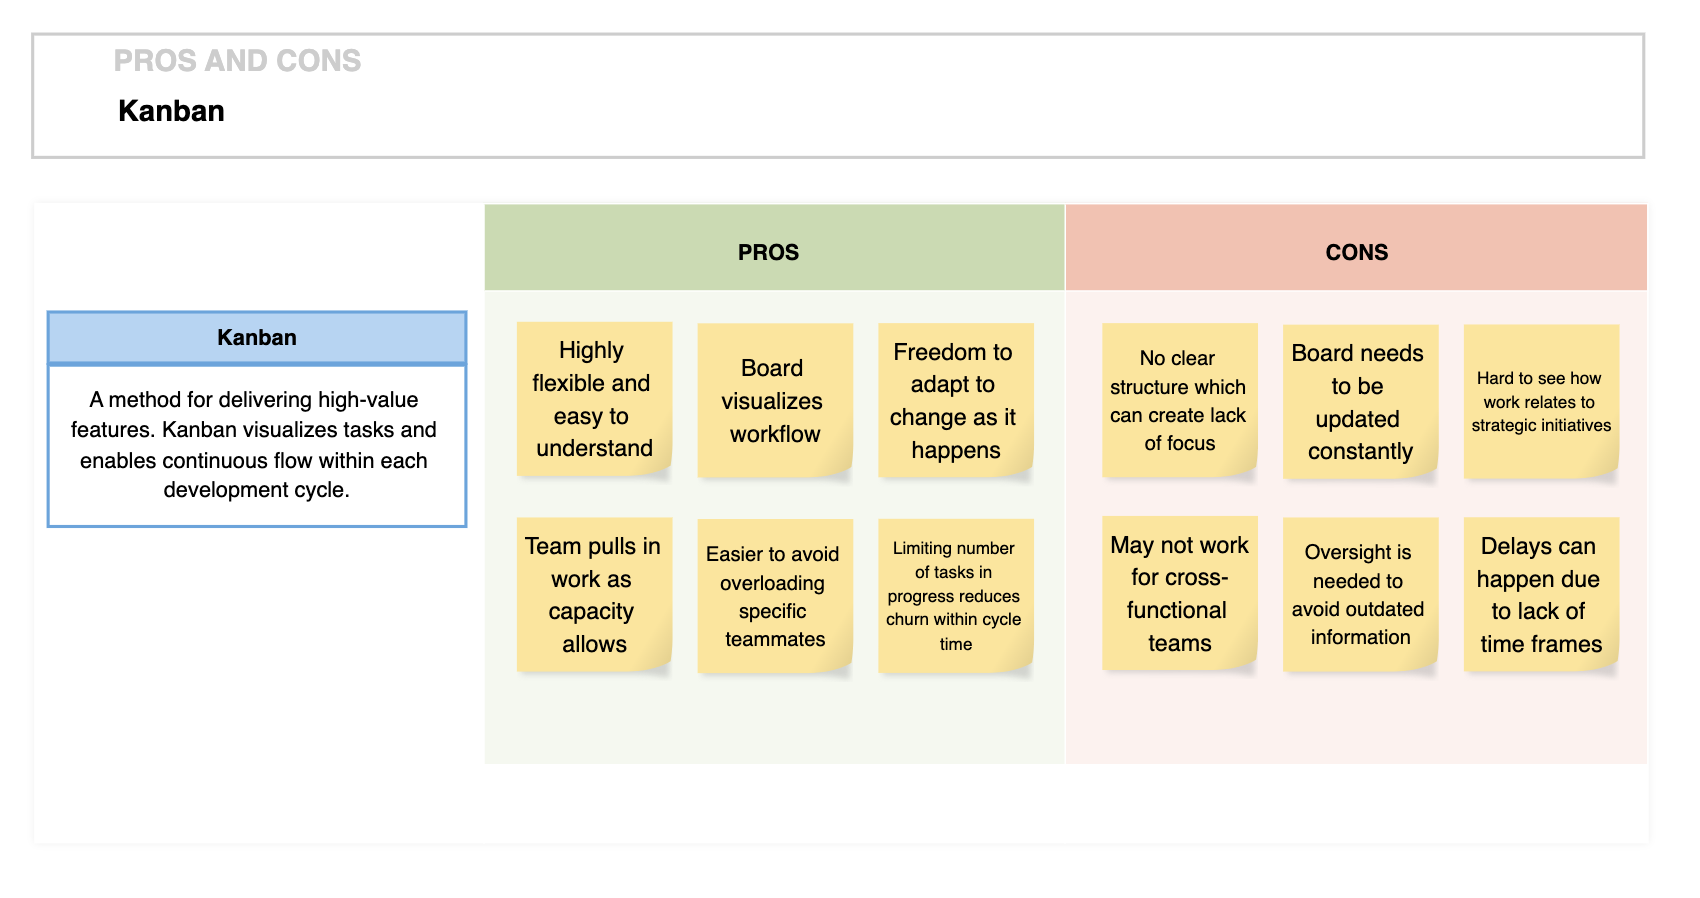 Pros and cons of kanban